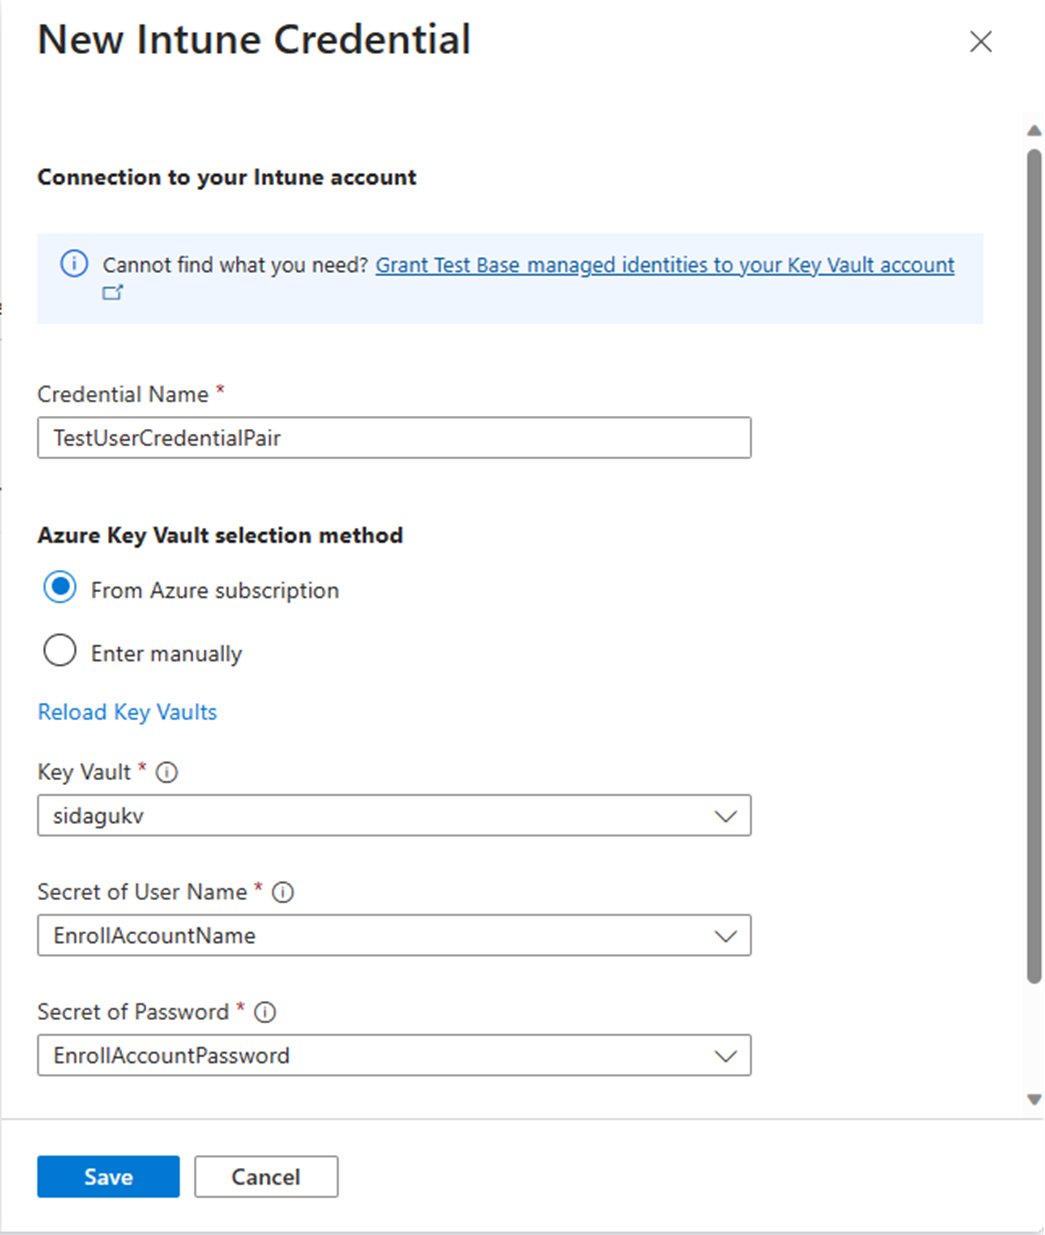 Screenshot of the new intune credentials page.